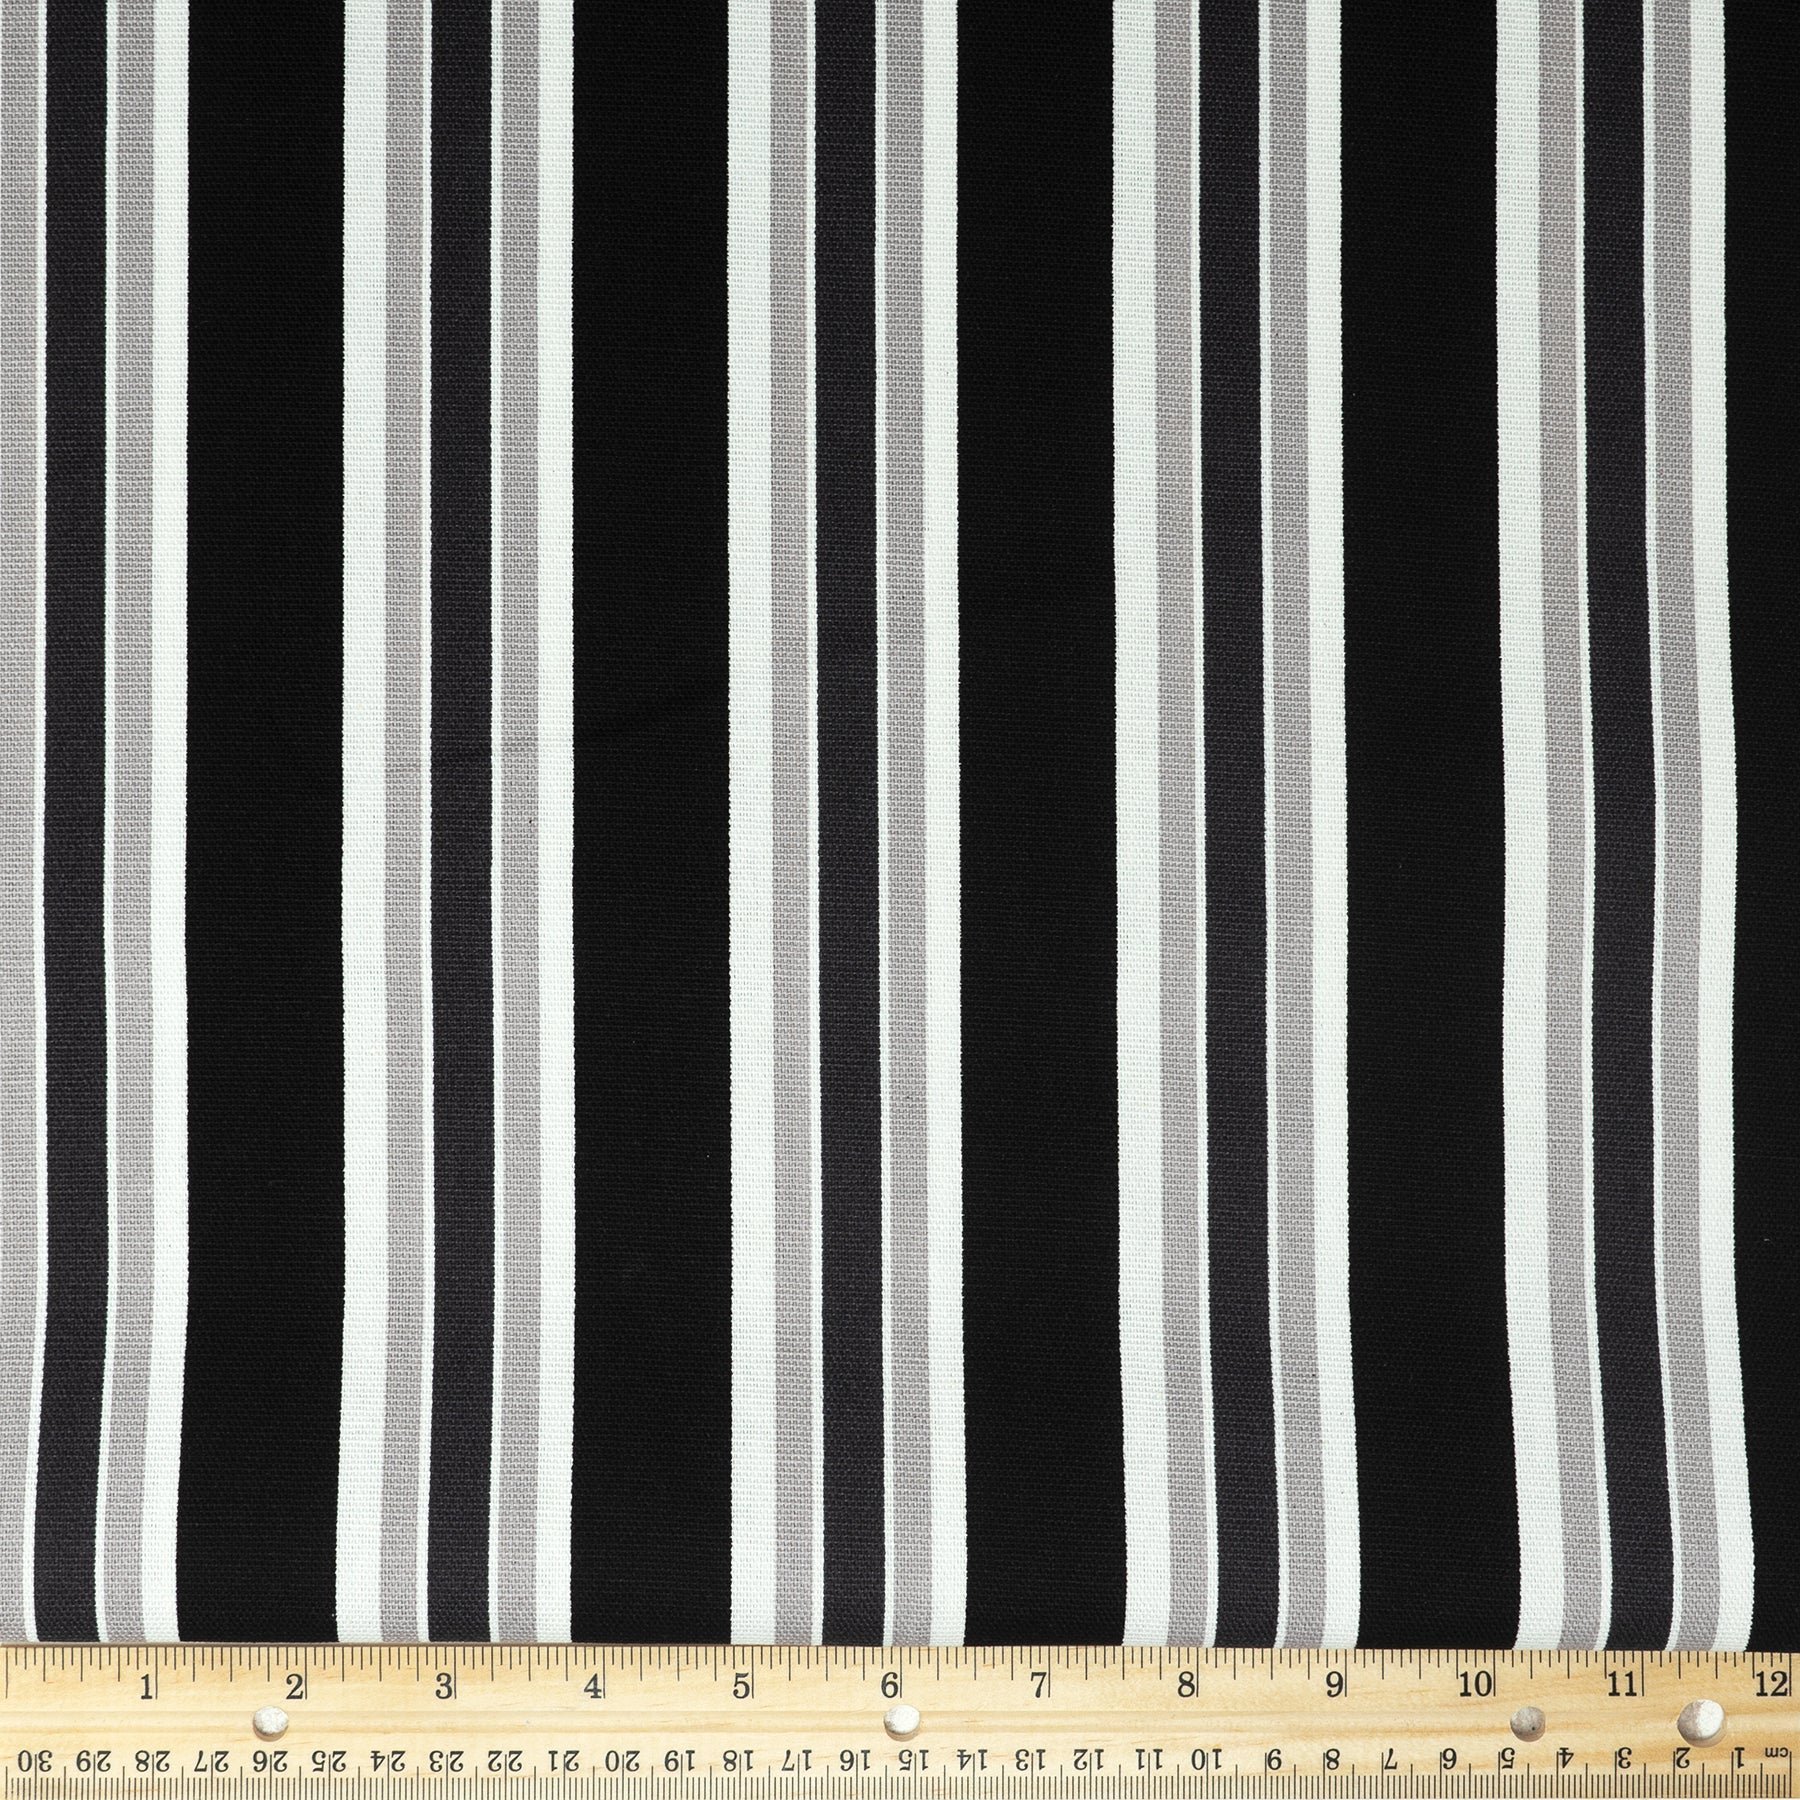 Waverly Inspirations 100% Cotton Duck 45" Width Large Stripe Print Black Color Sewing Fabric by the Yard